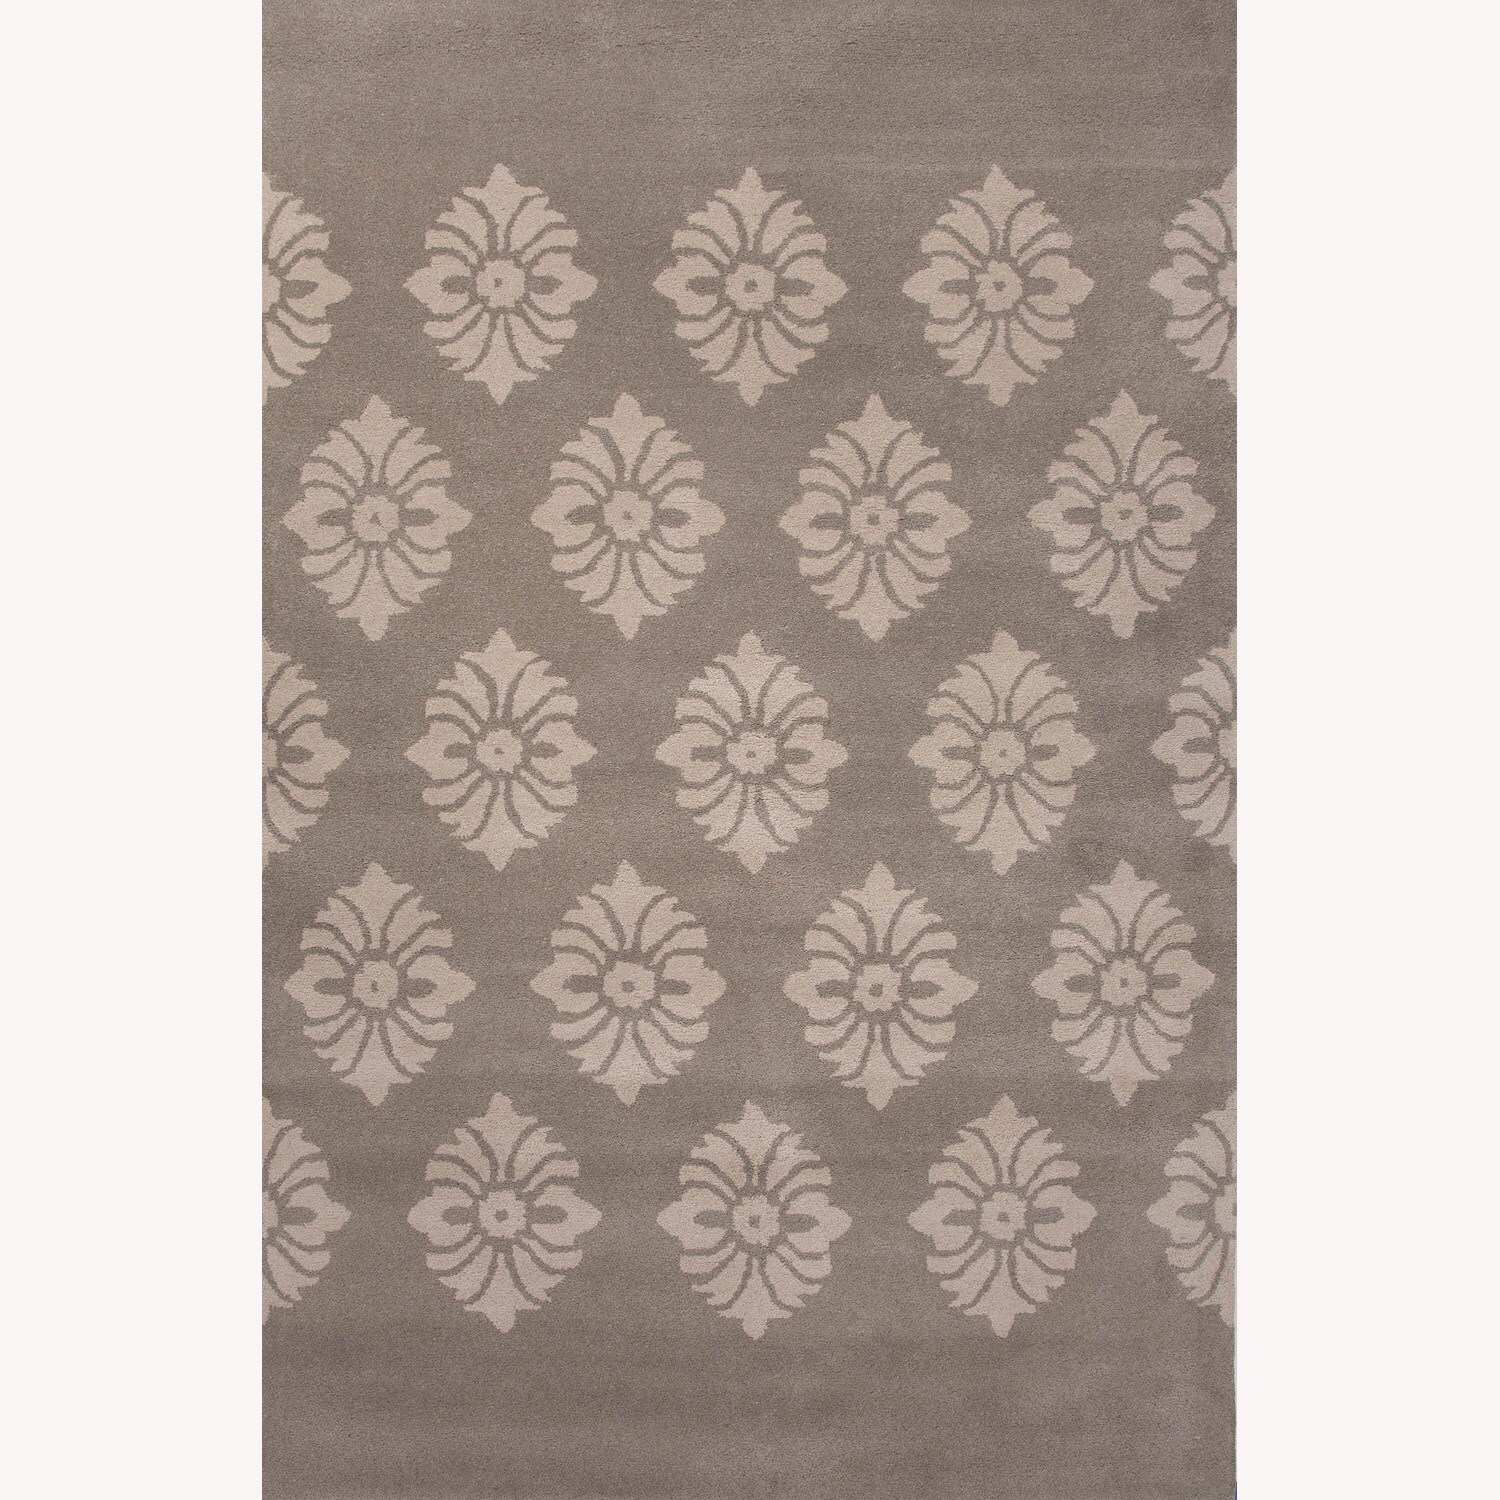 Hand Tufted Holiday Pattern Grey/white Wool Rug (8x10)